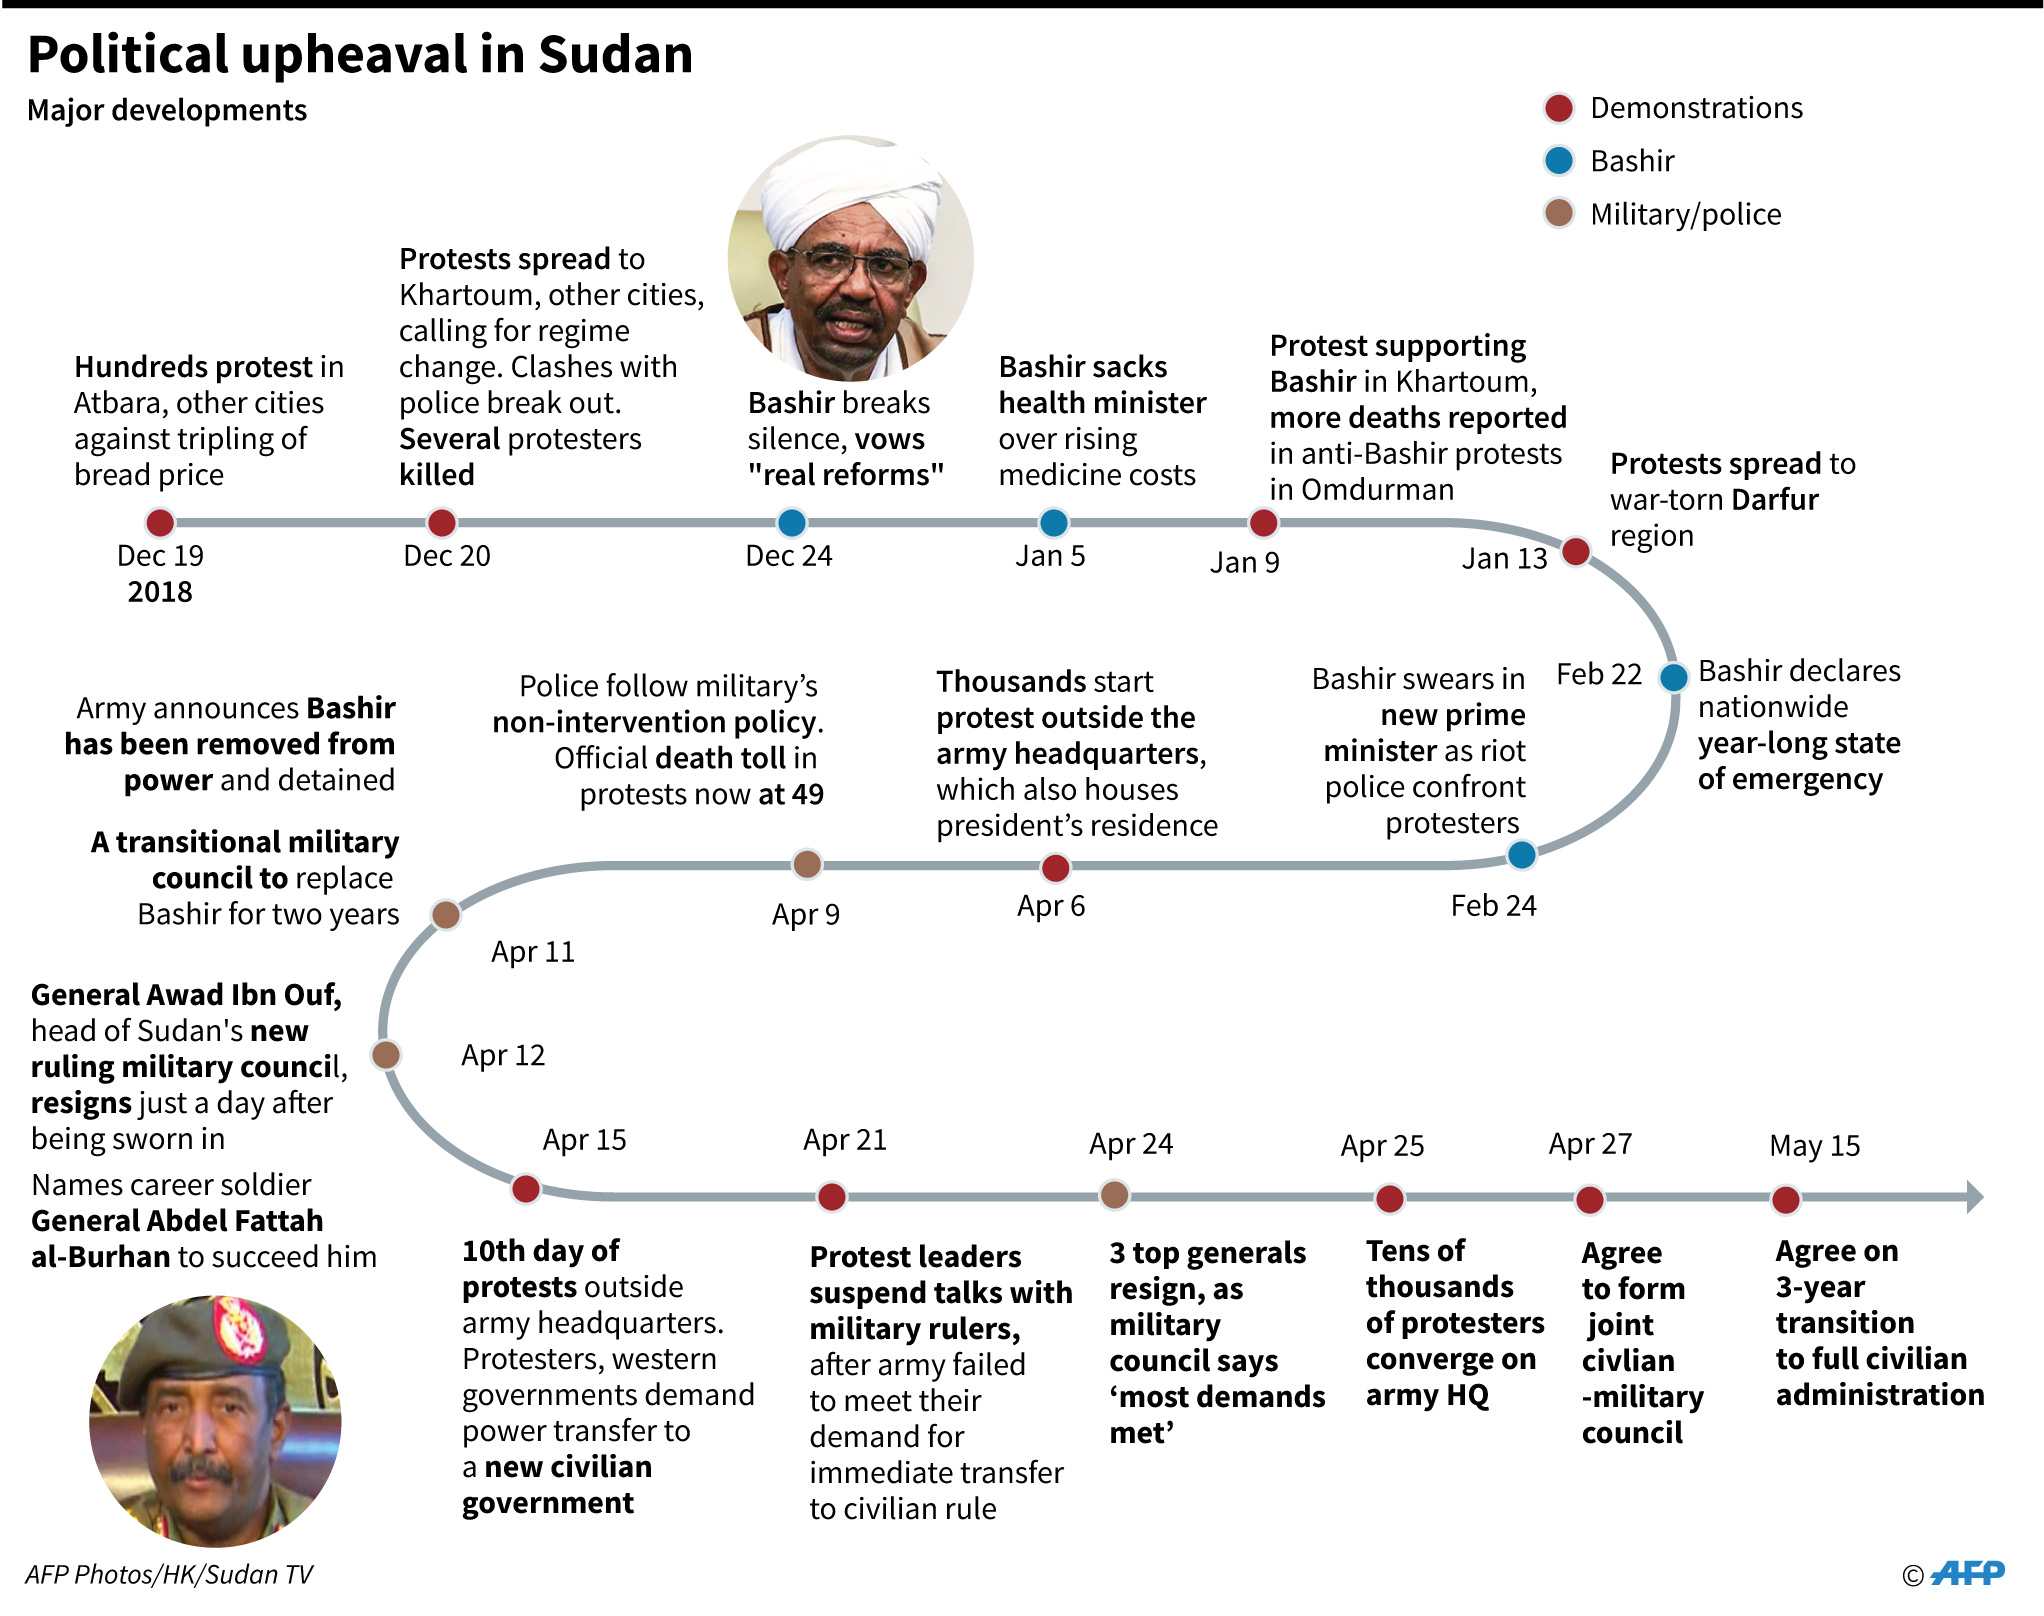 Chronology of main developments in mass protests in Sudan